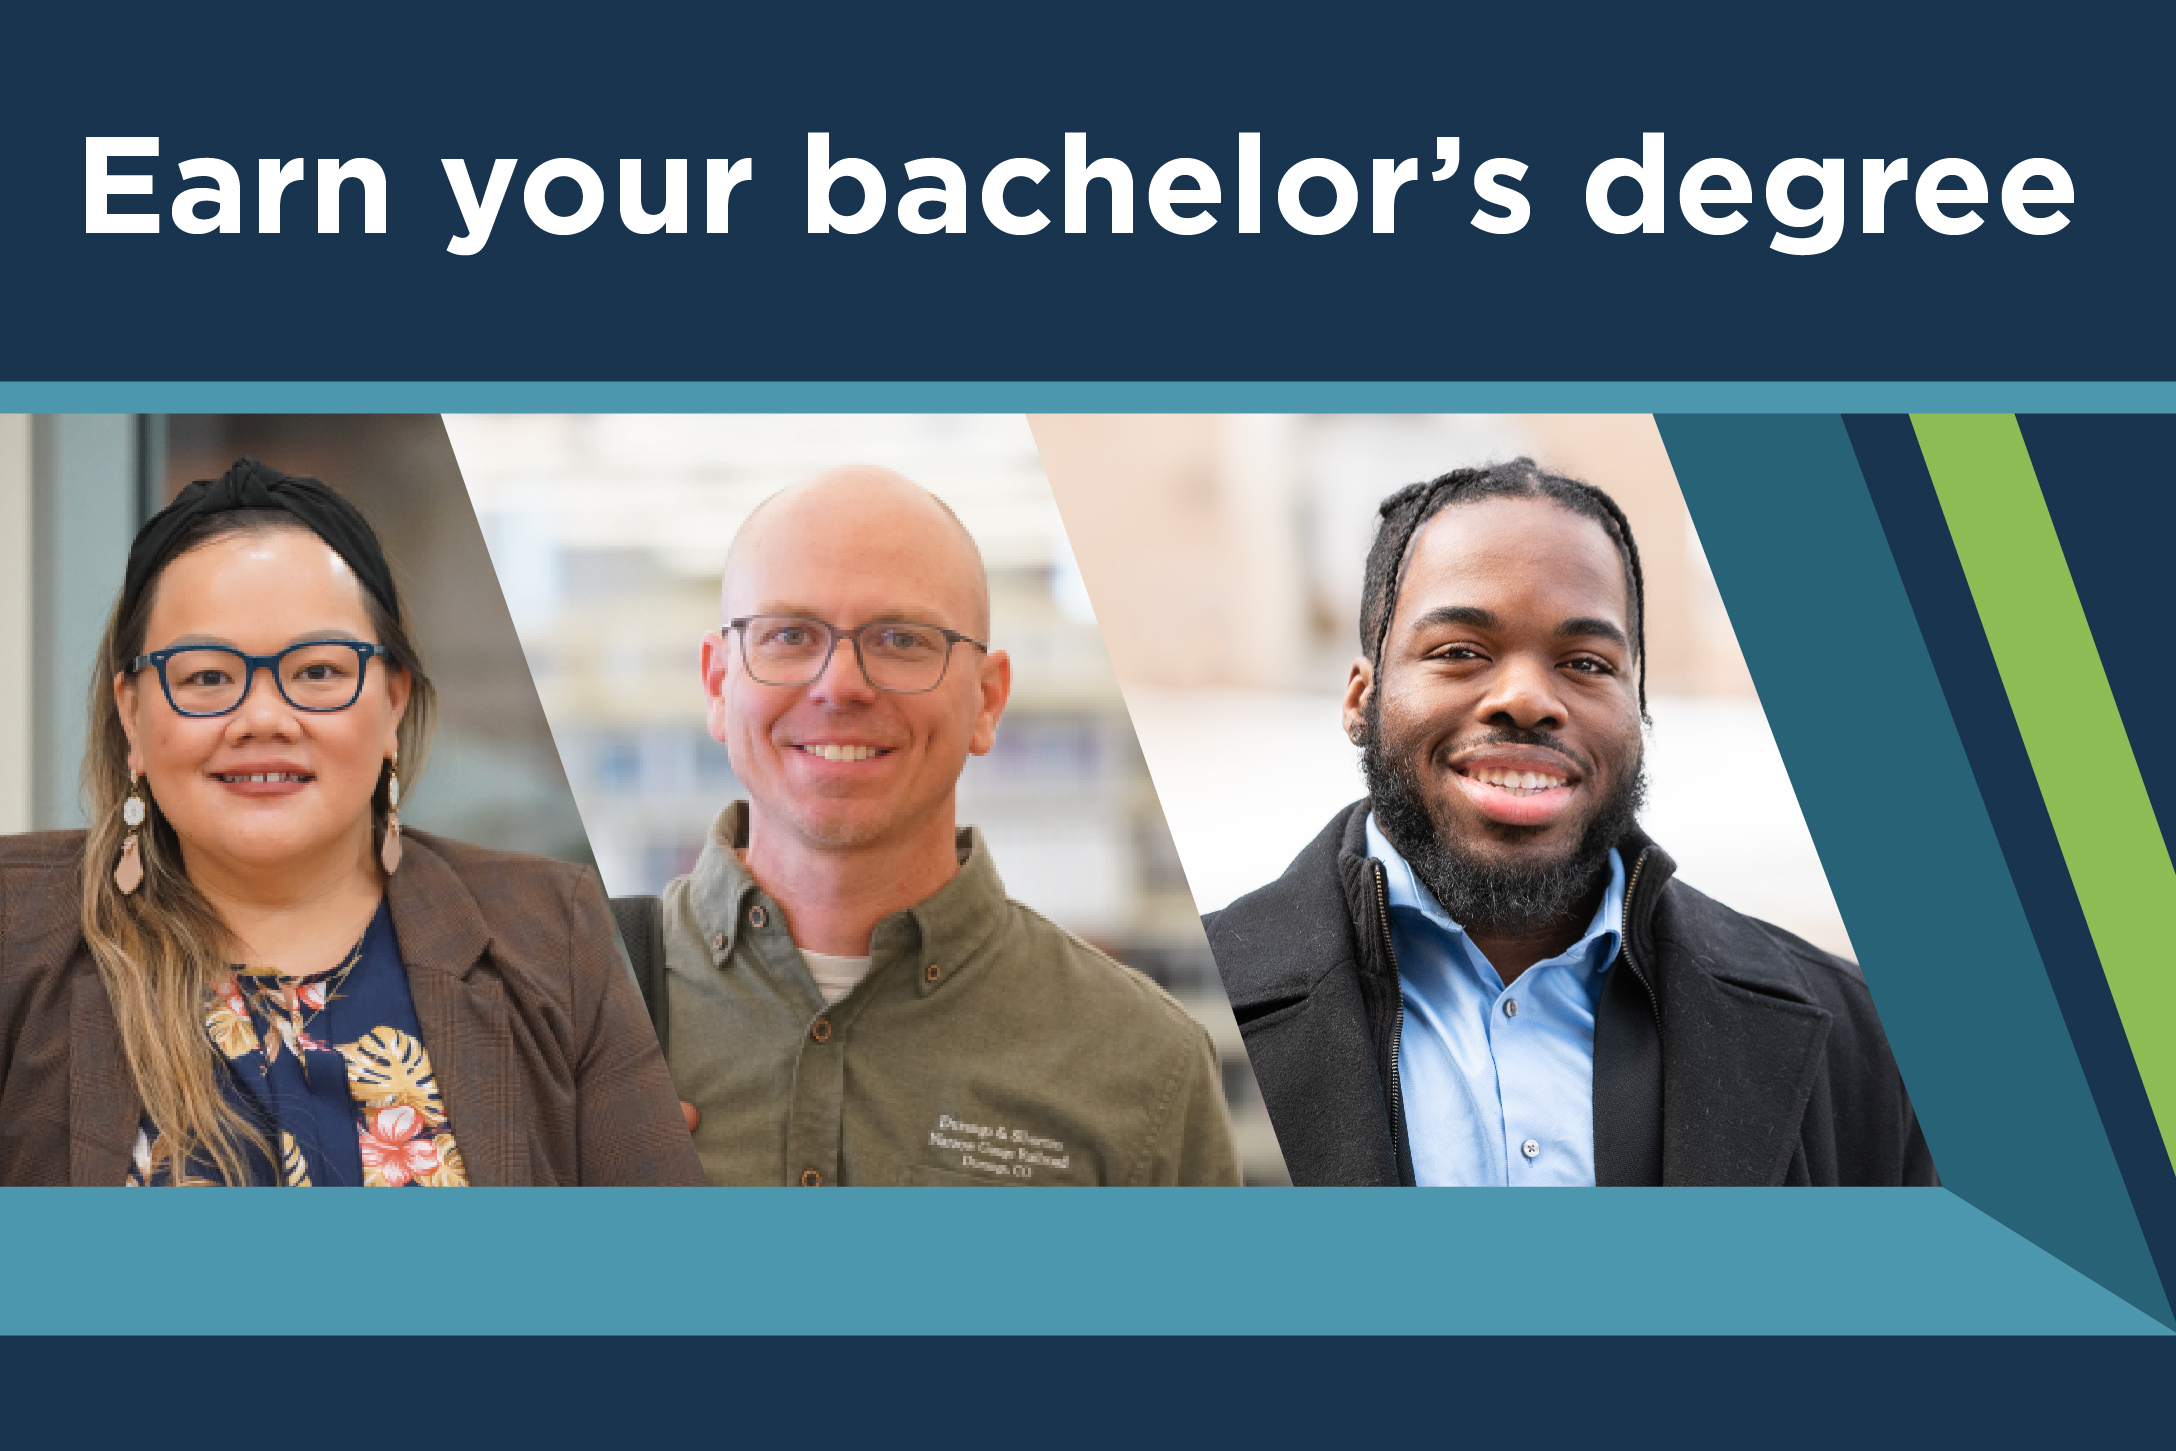 Three students in separate portraits surrounded by a blue and green border and "Earn your bachelor's degree" above them